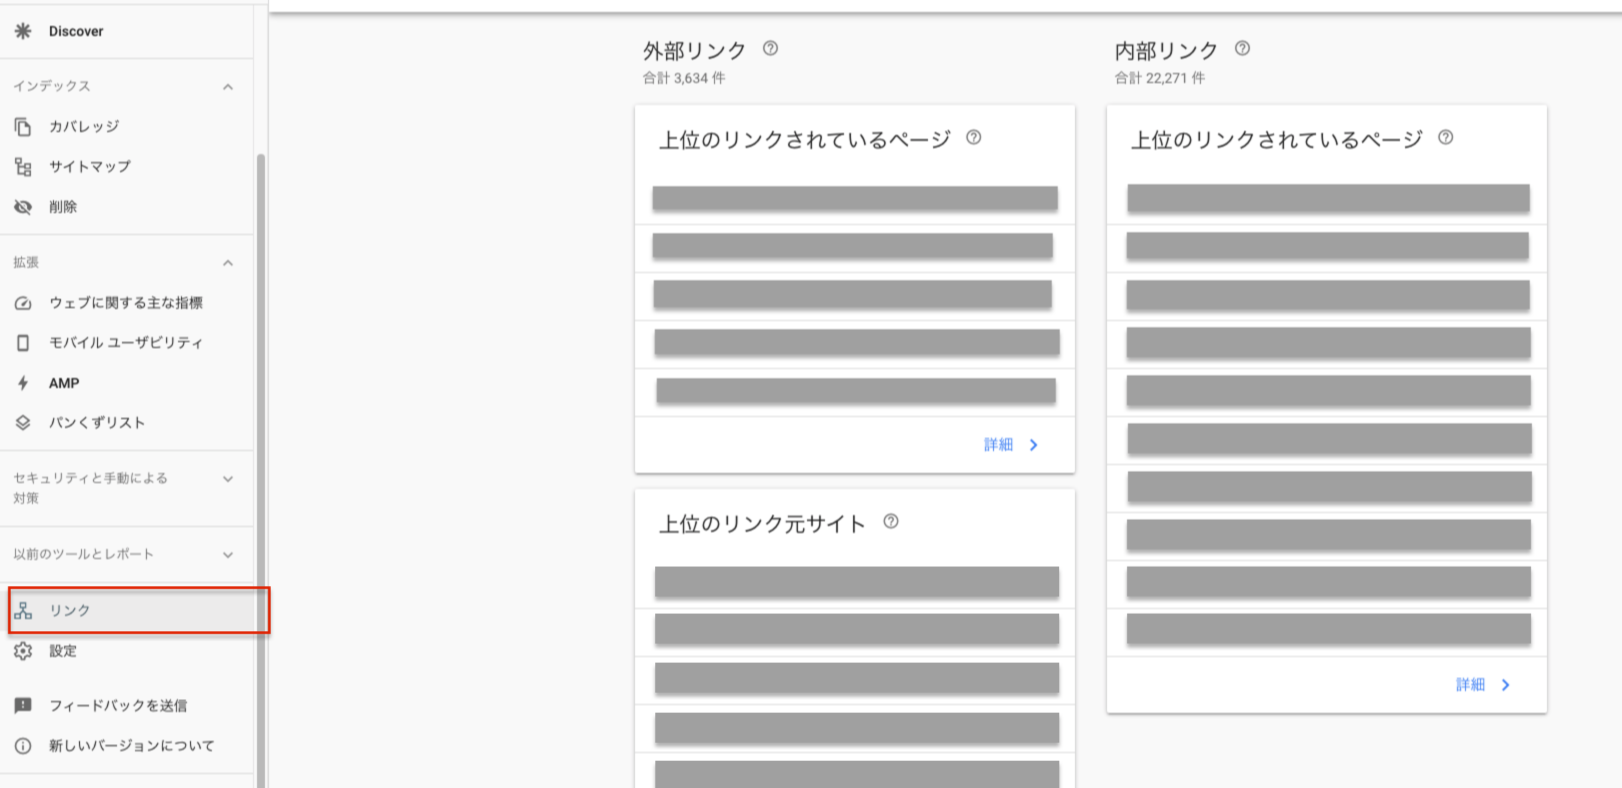 Google Search Consoleにログインする